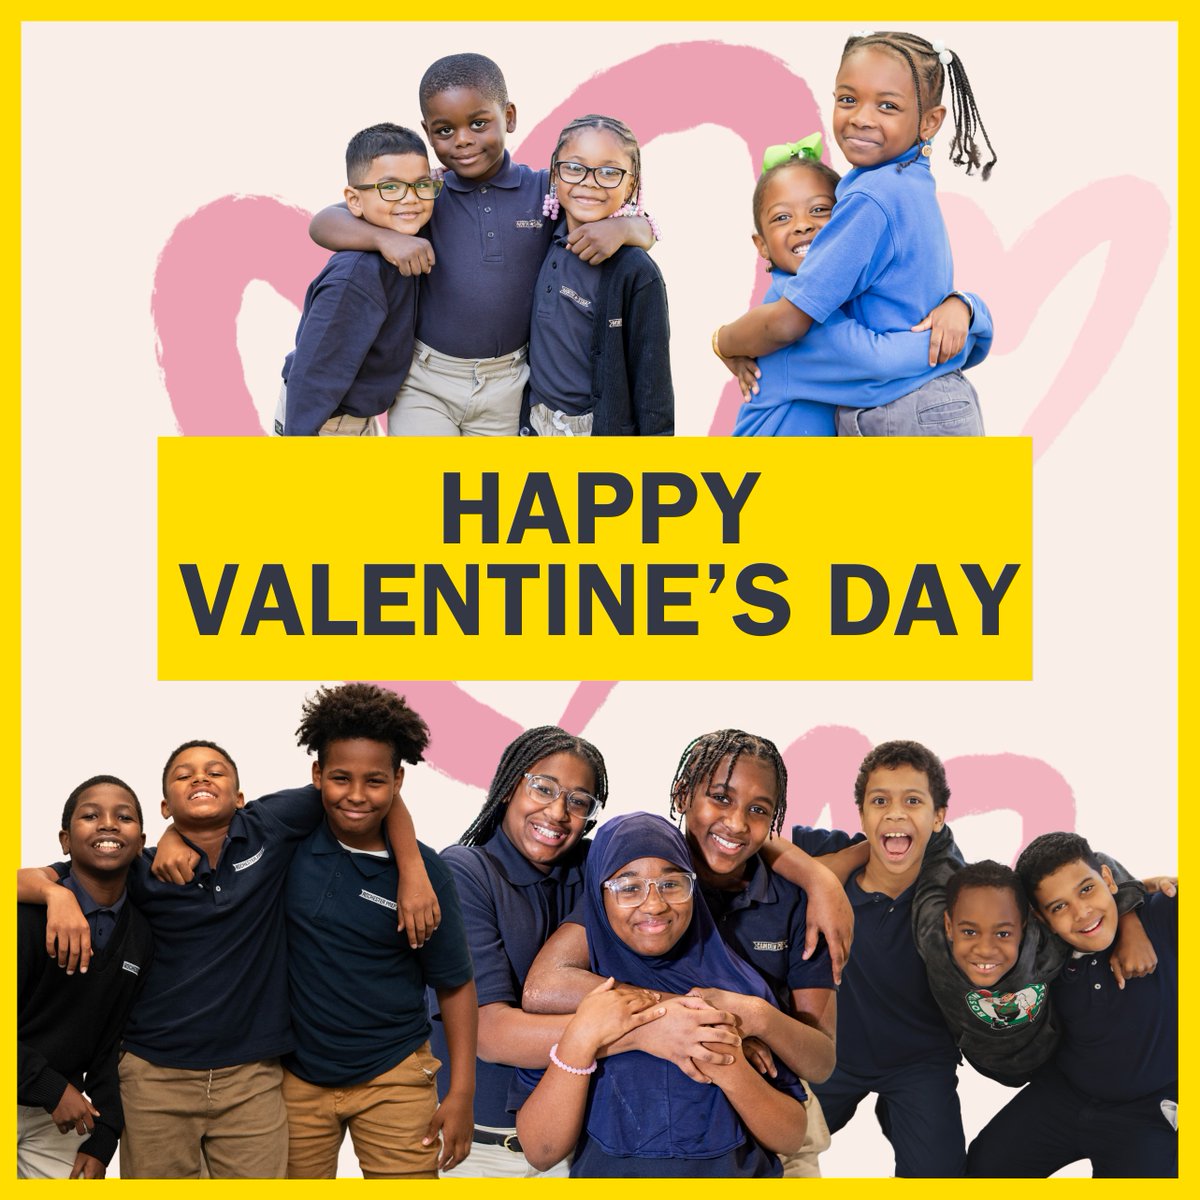 Spreading love to our Uncommon Schools community this Valentine's Day💖